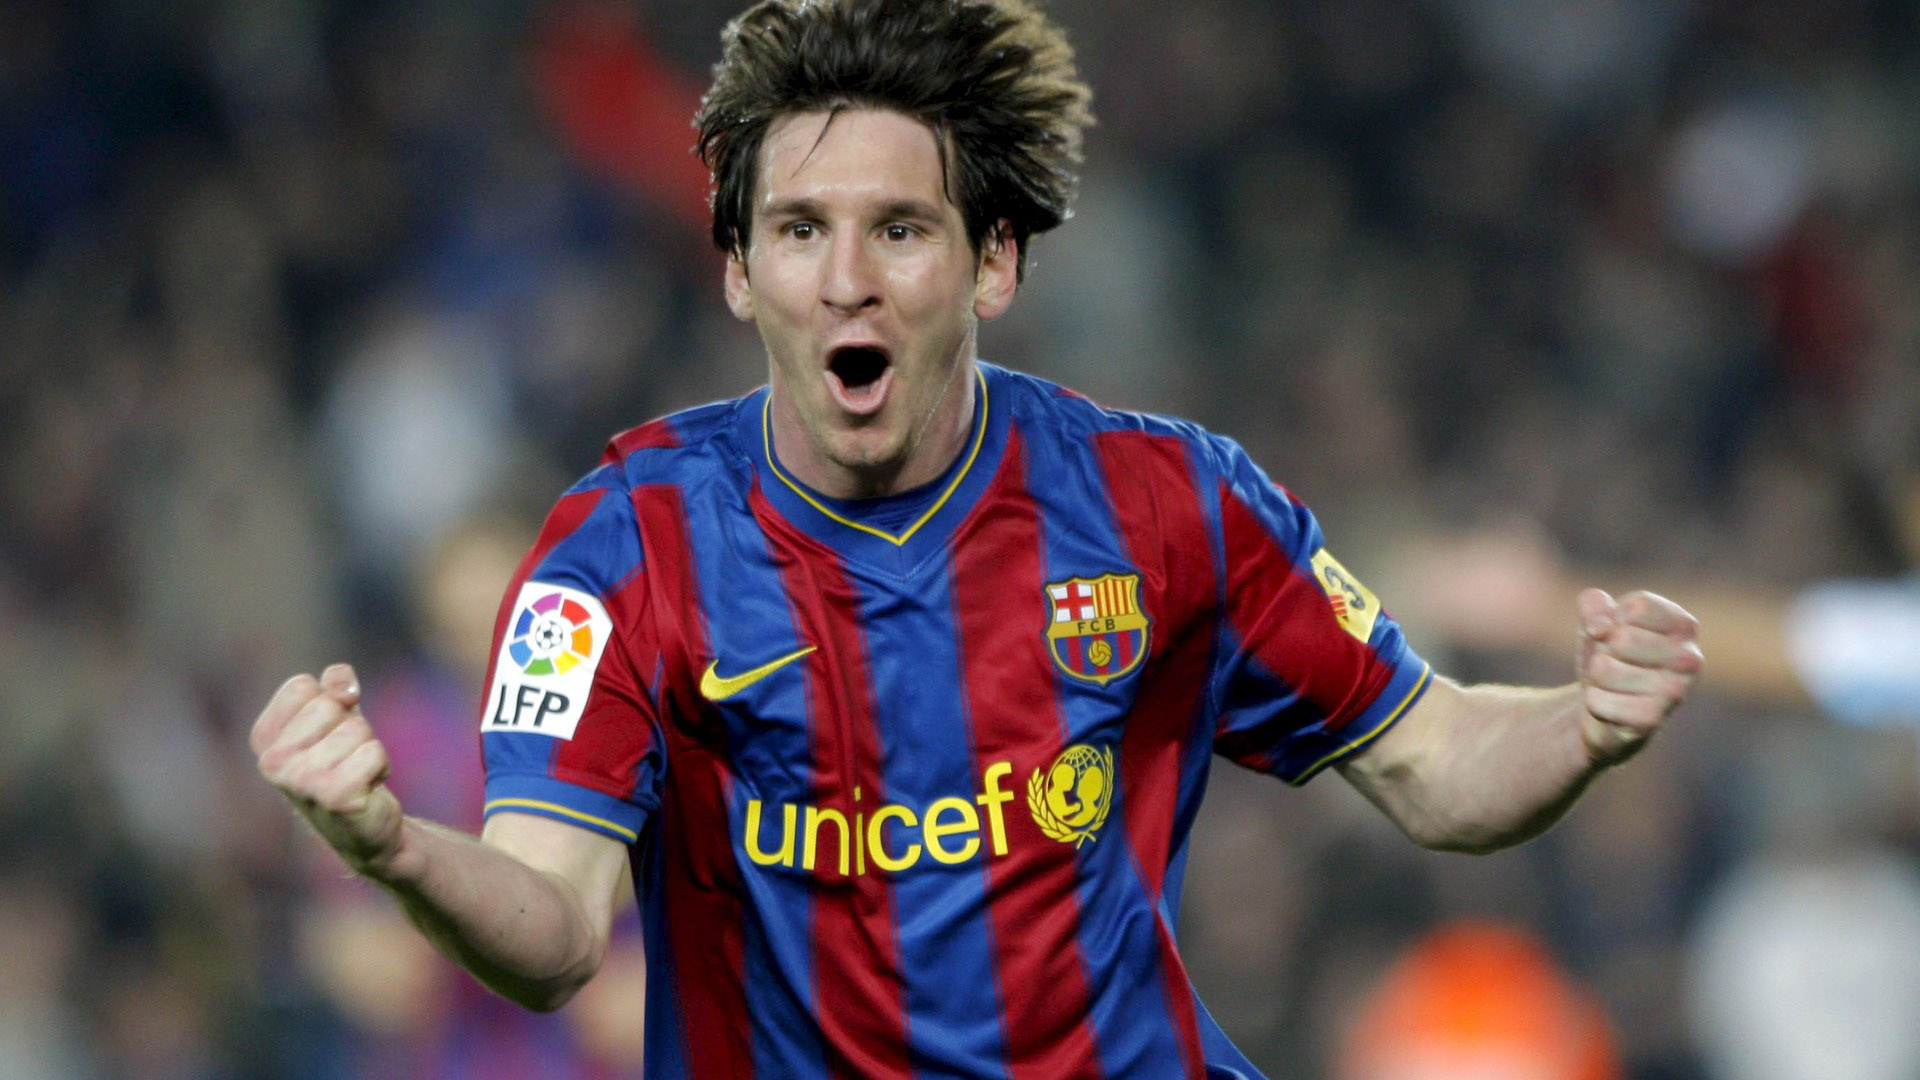 lionel-messi-excited-after-goal-images